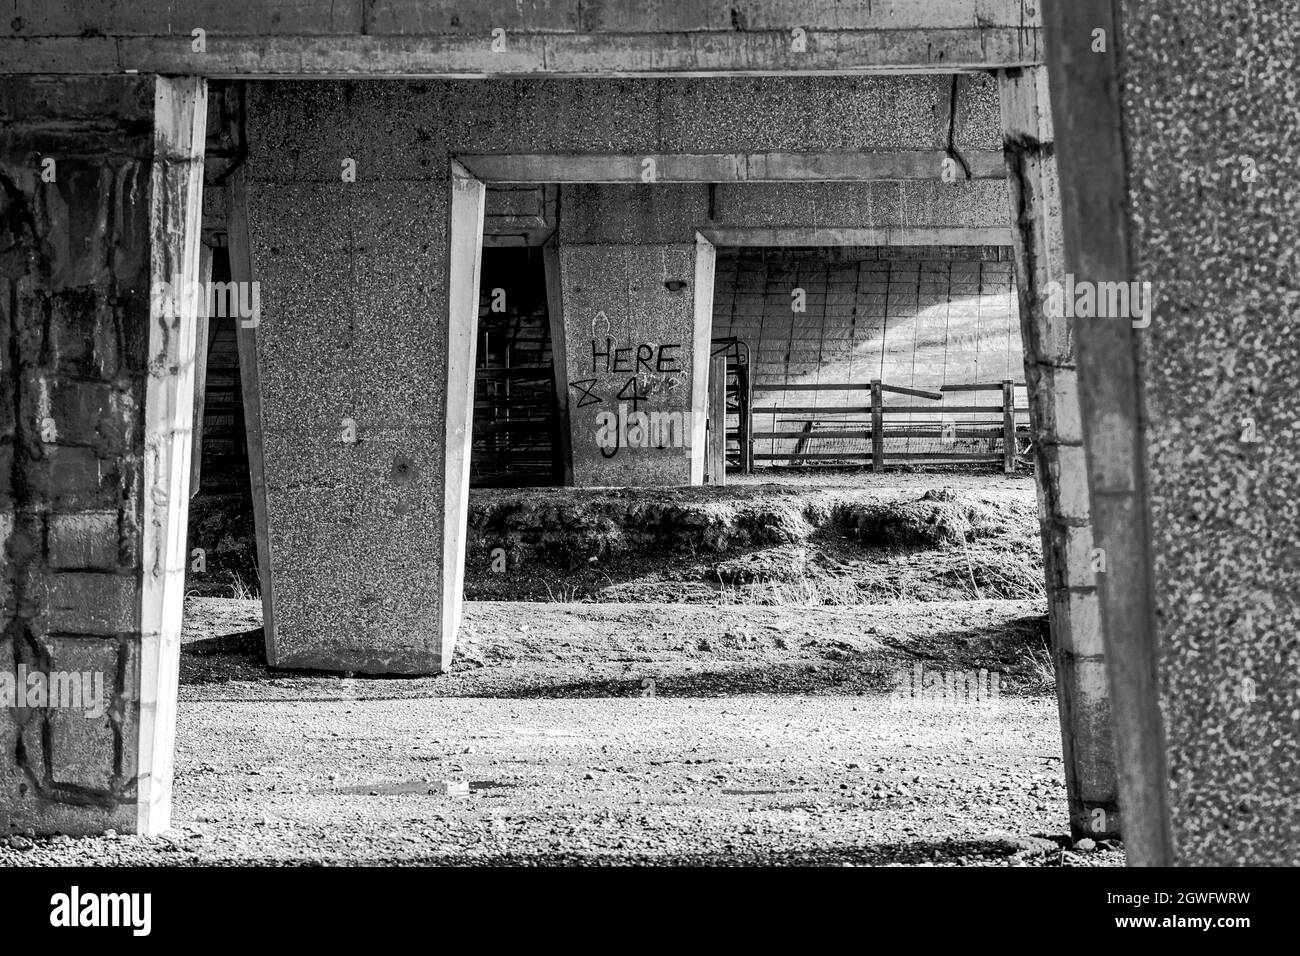 Looking through a seires of concrete supports under a road with graffiti saying 'Here 4 you' - monochrome Stock Photo